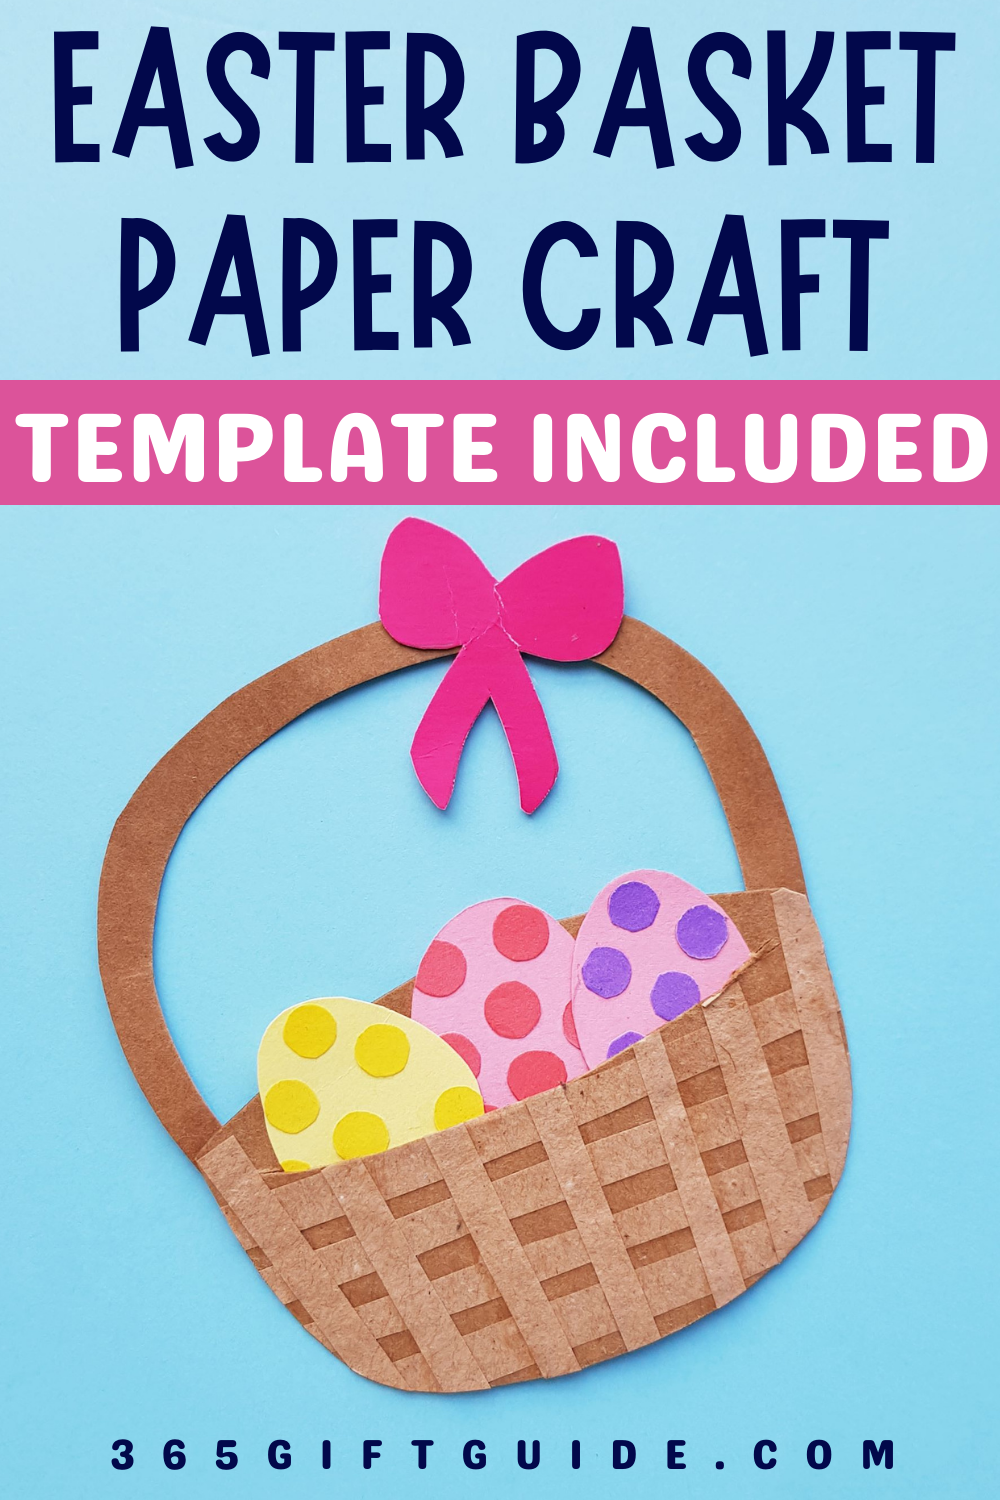 Easter Basket Craft WIth Template Included